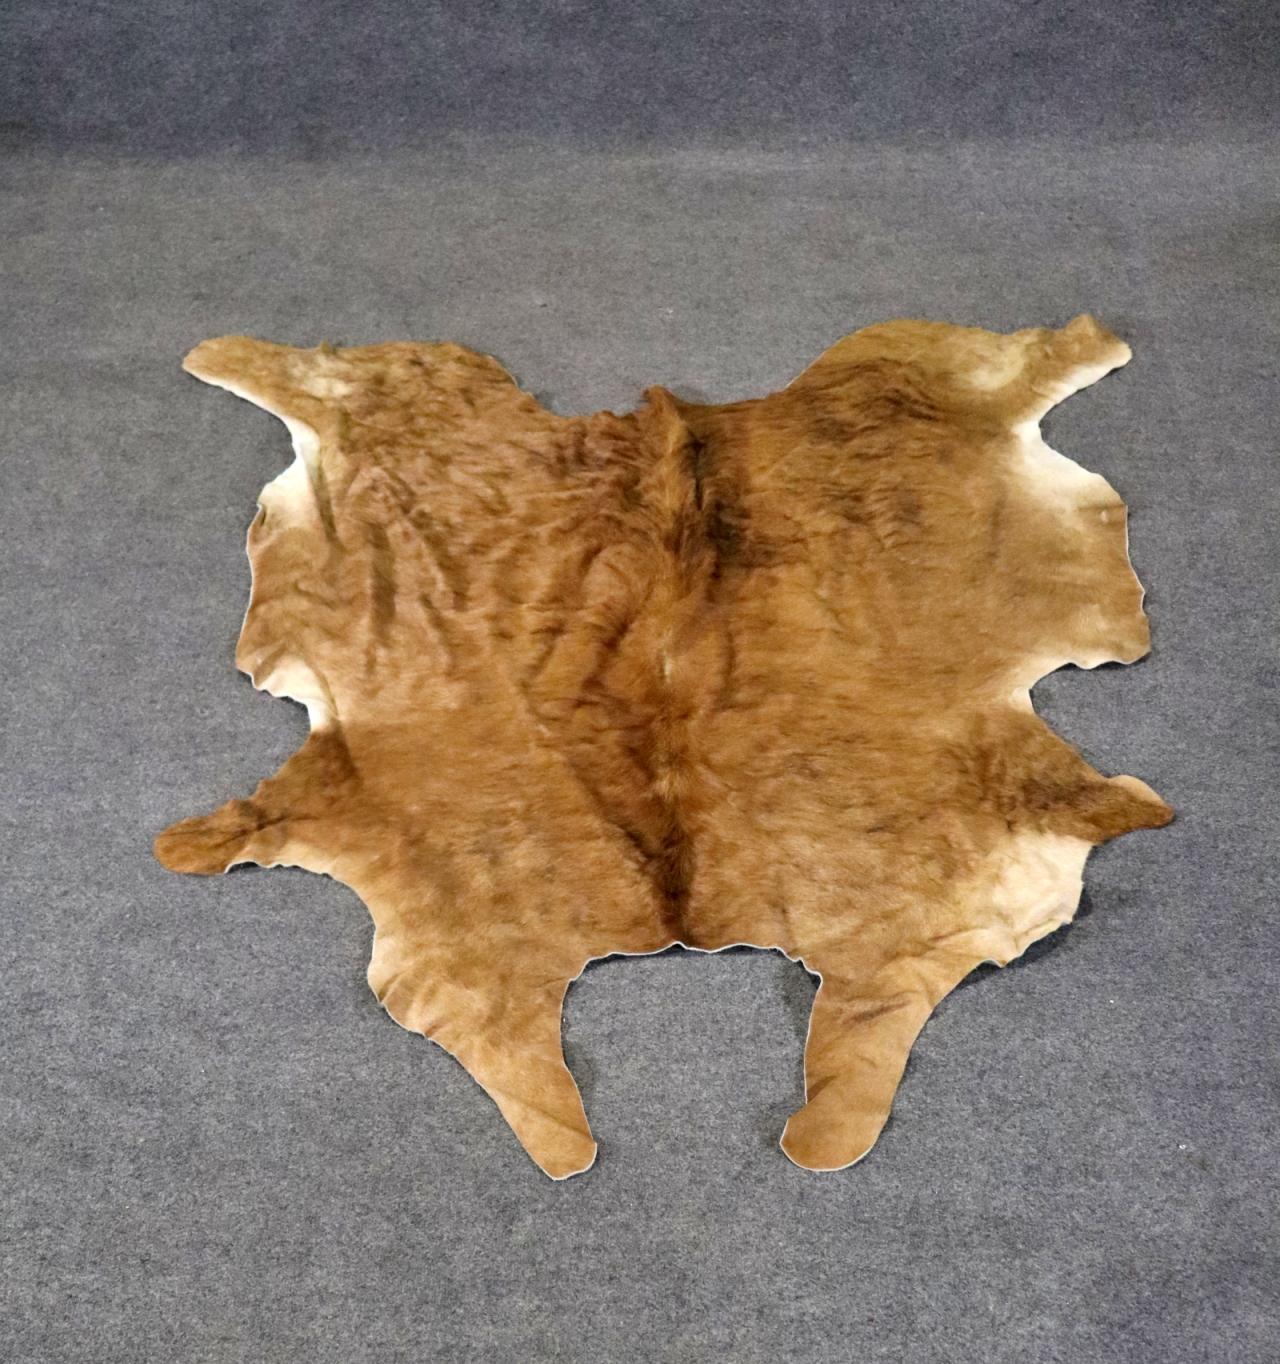 Large cow hide rug measuring over six feet. Beautiful style for your modern or rustic style home.
Please confirm location NY or NJ